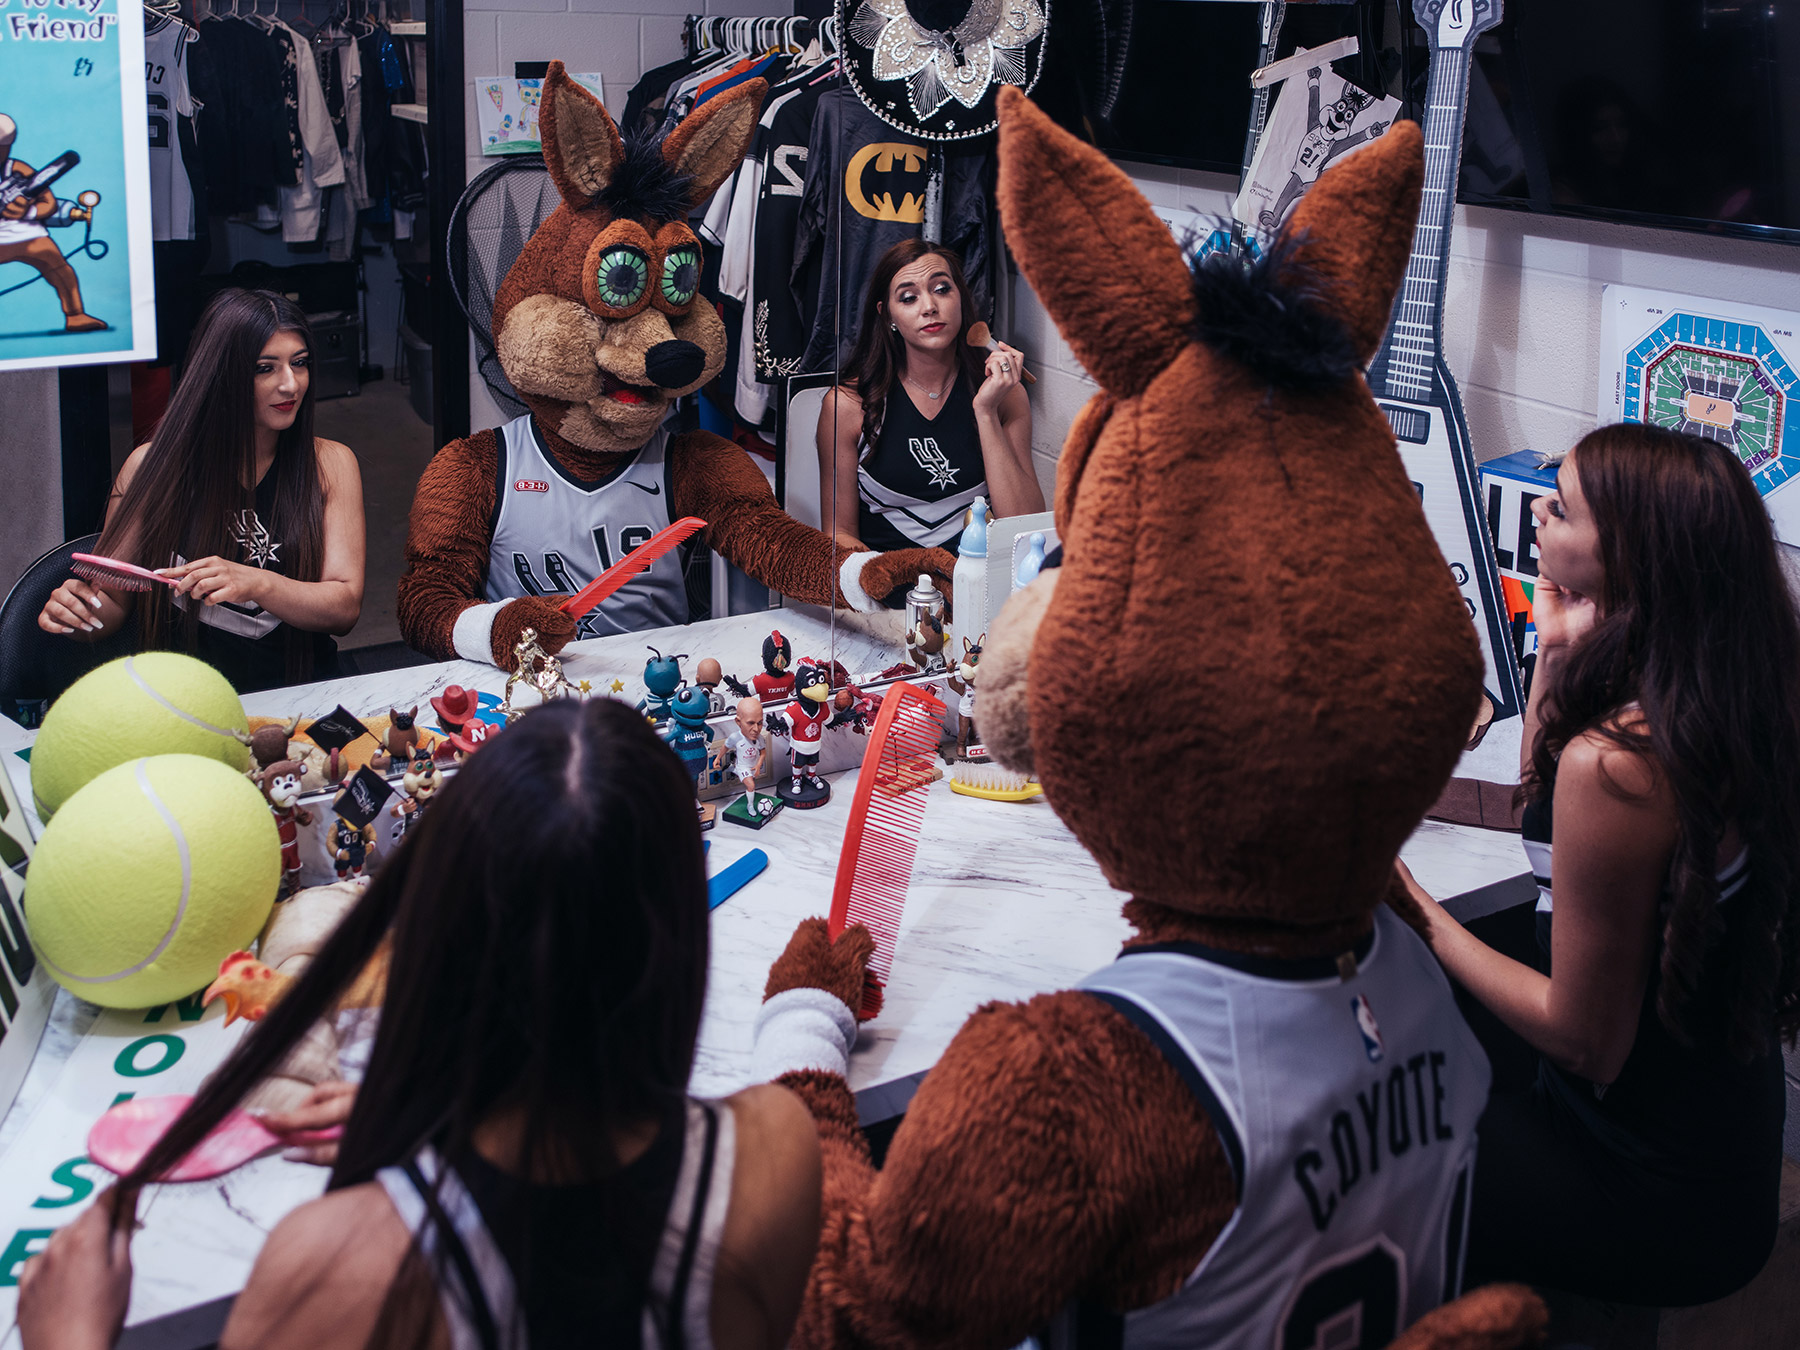 NBA Mascot, Spurs Coyote, photographed at the AT&T Center by sports and editorial photographer, Josh Huskin.